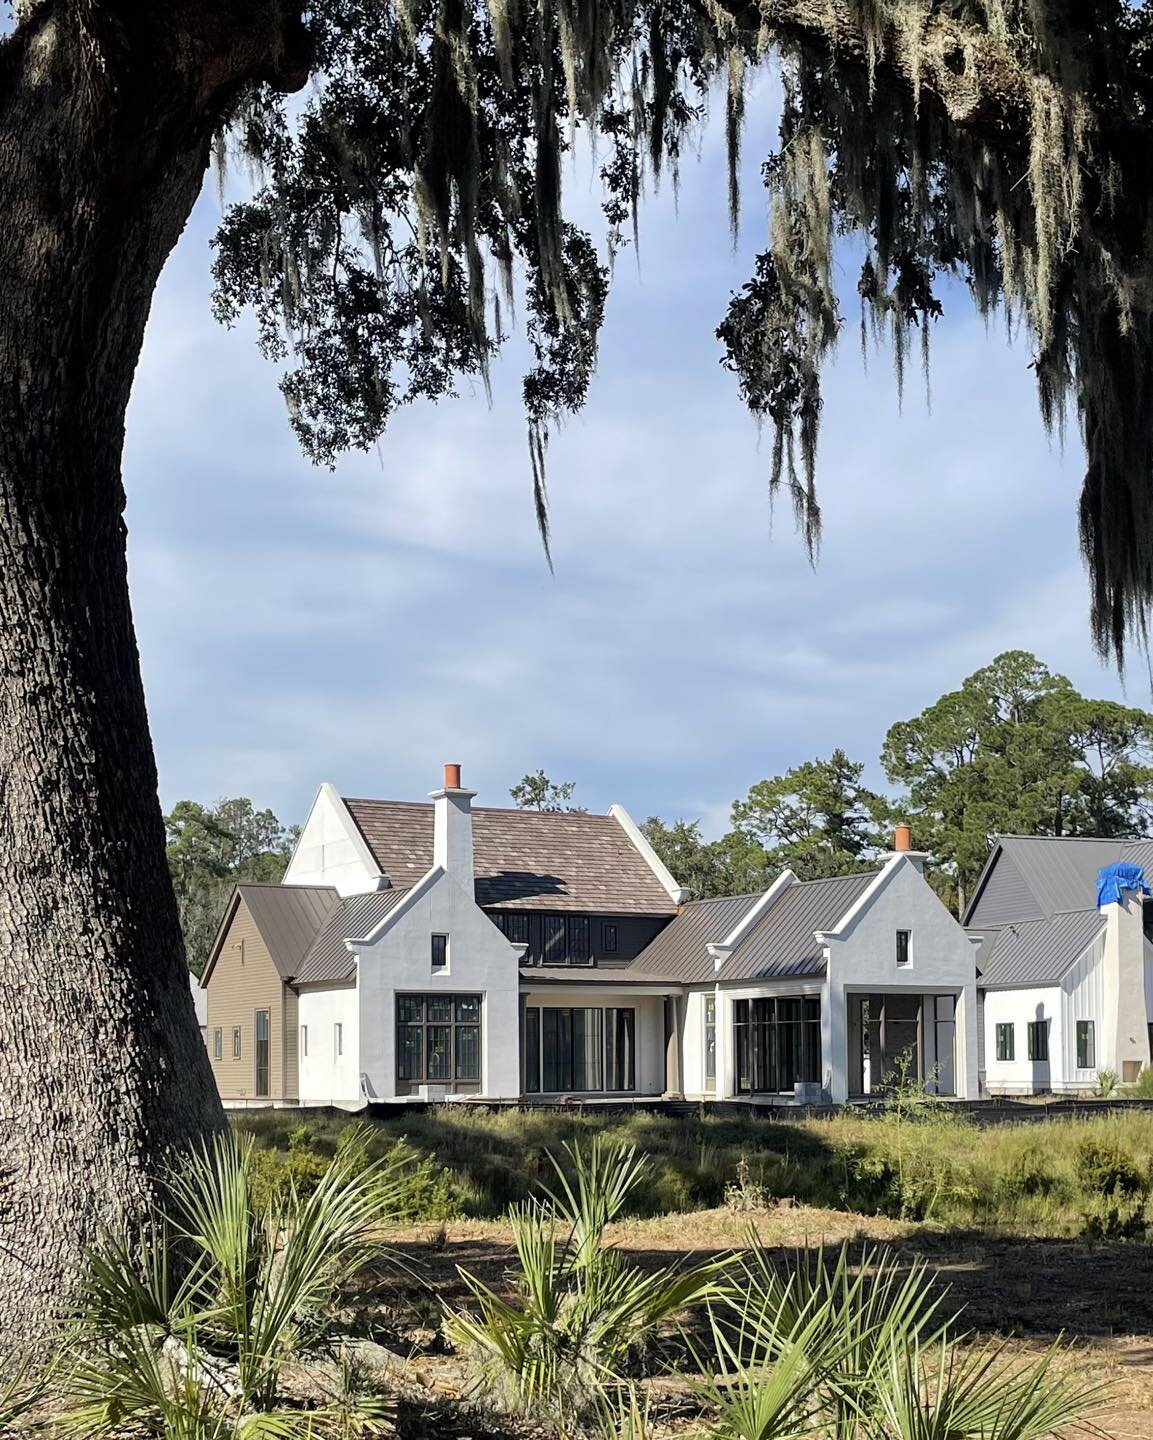 Water and live oak views from these porches on a beautiful Friday.

General Contractor: @pr_homesbluffton

#residentialarchitecture #customhome #palmettobluff #porch